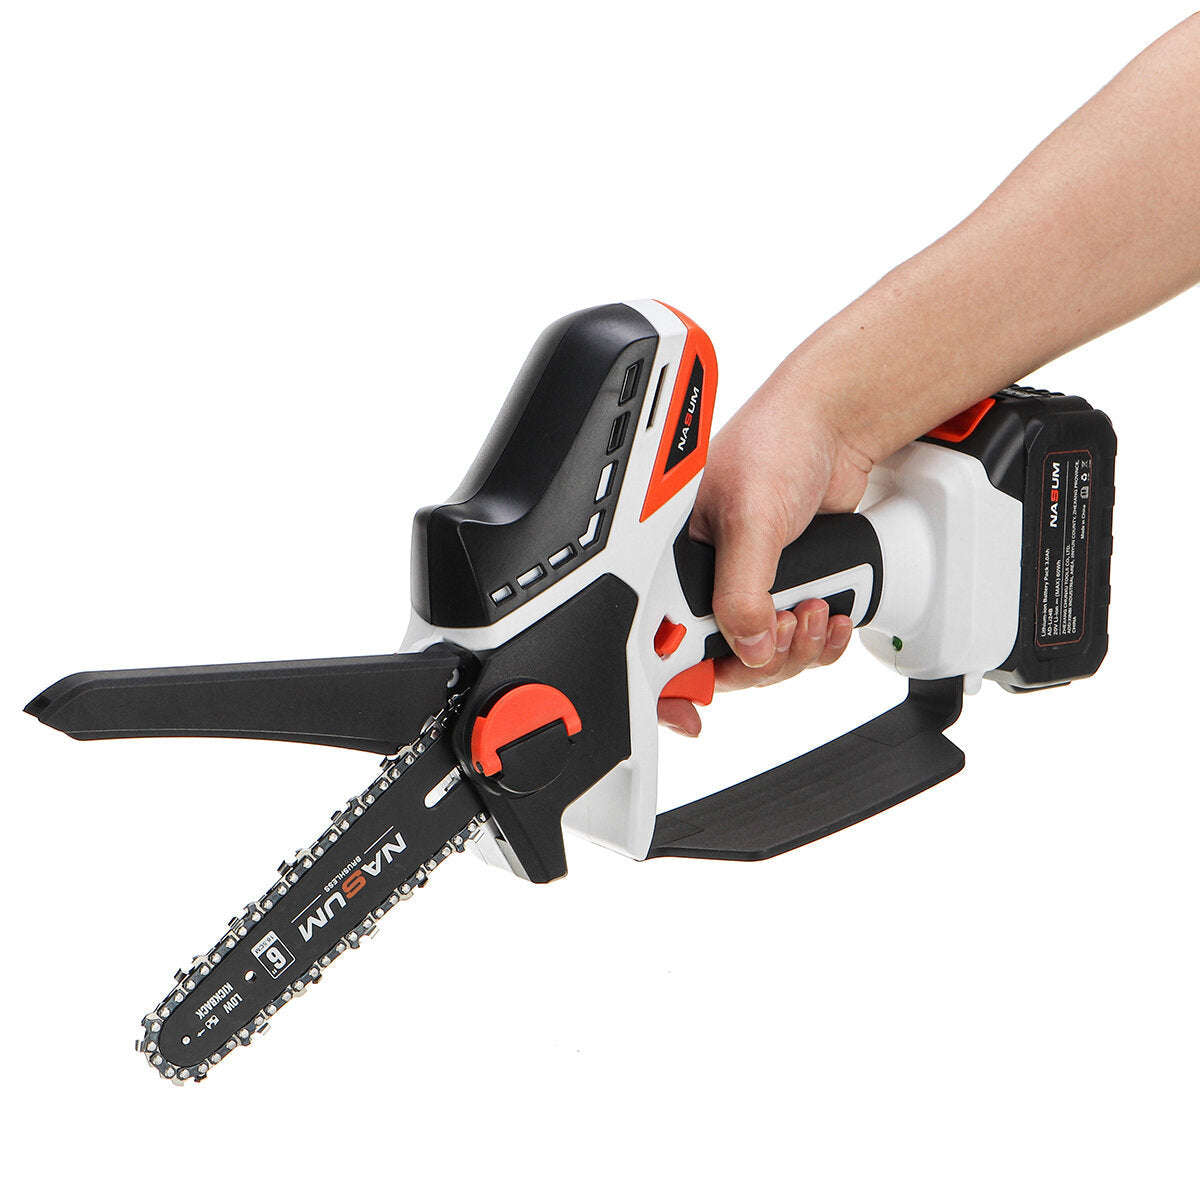 6 Inch Brushless Chainsaw Cordless Mini Handheld Pruning Saw Portable Electric Cutting Tool